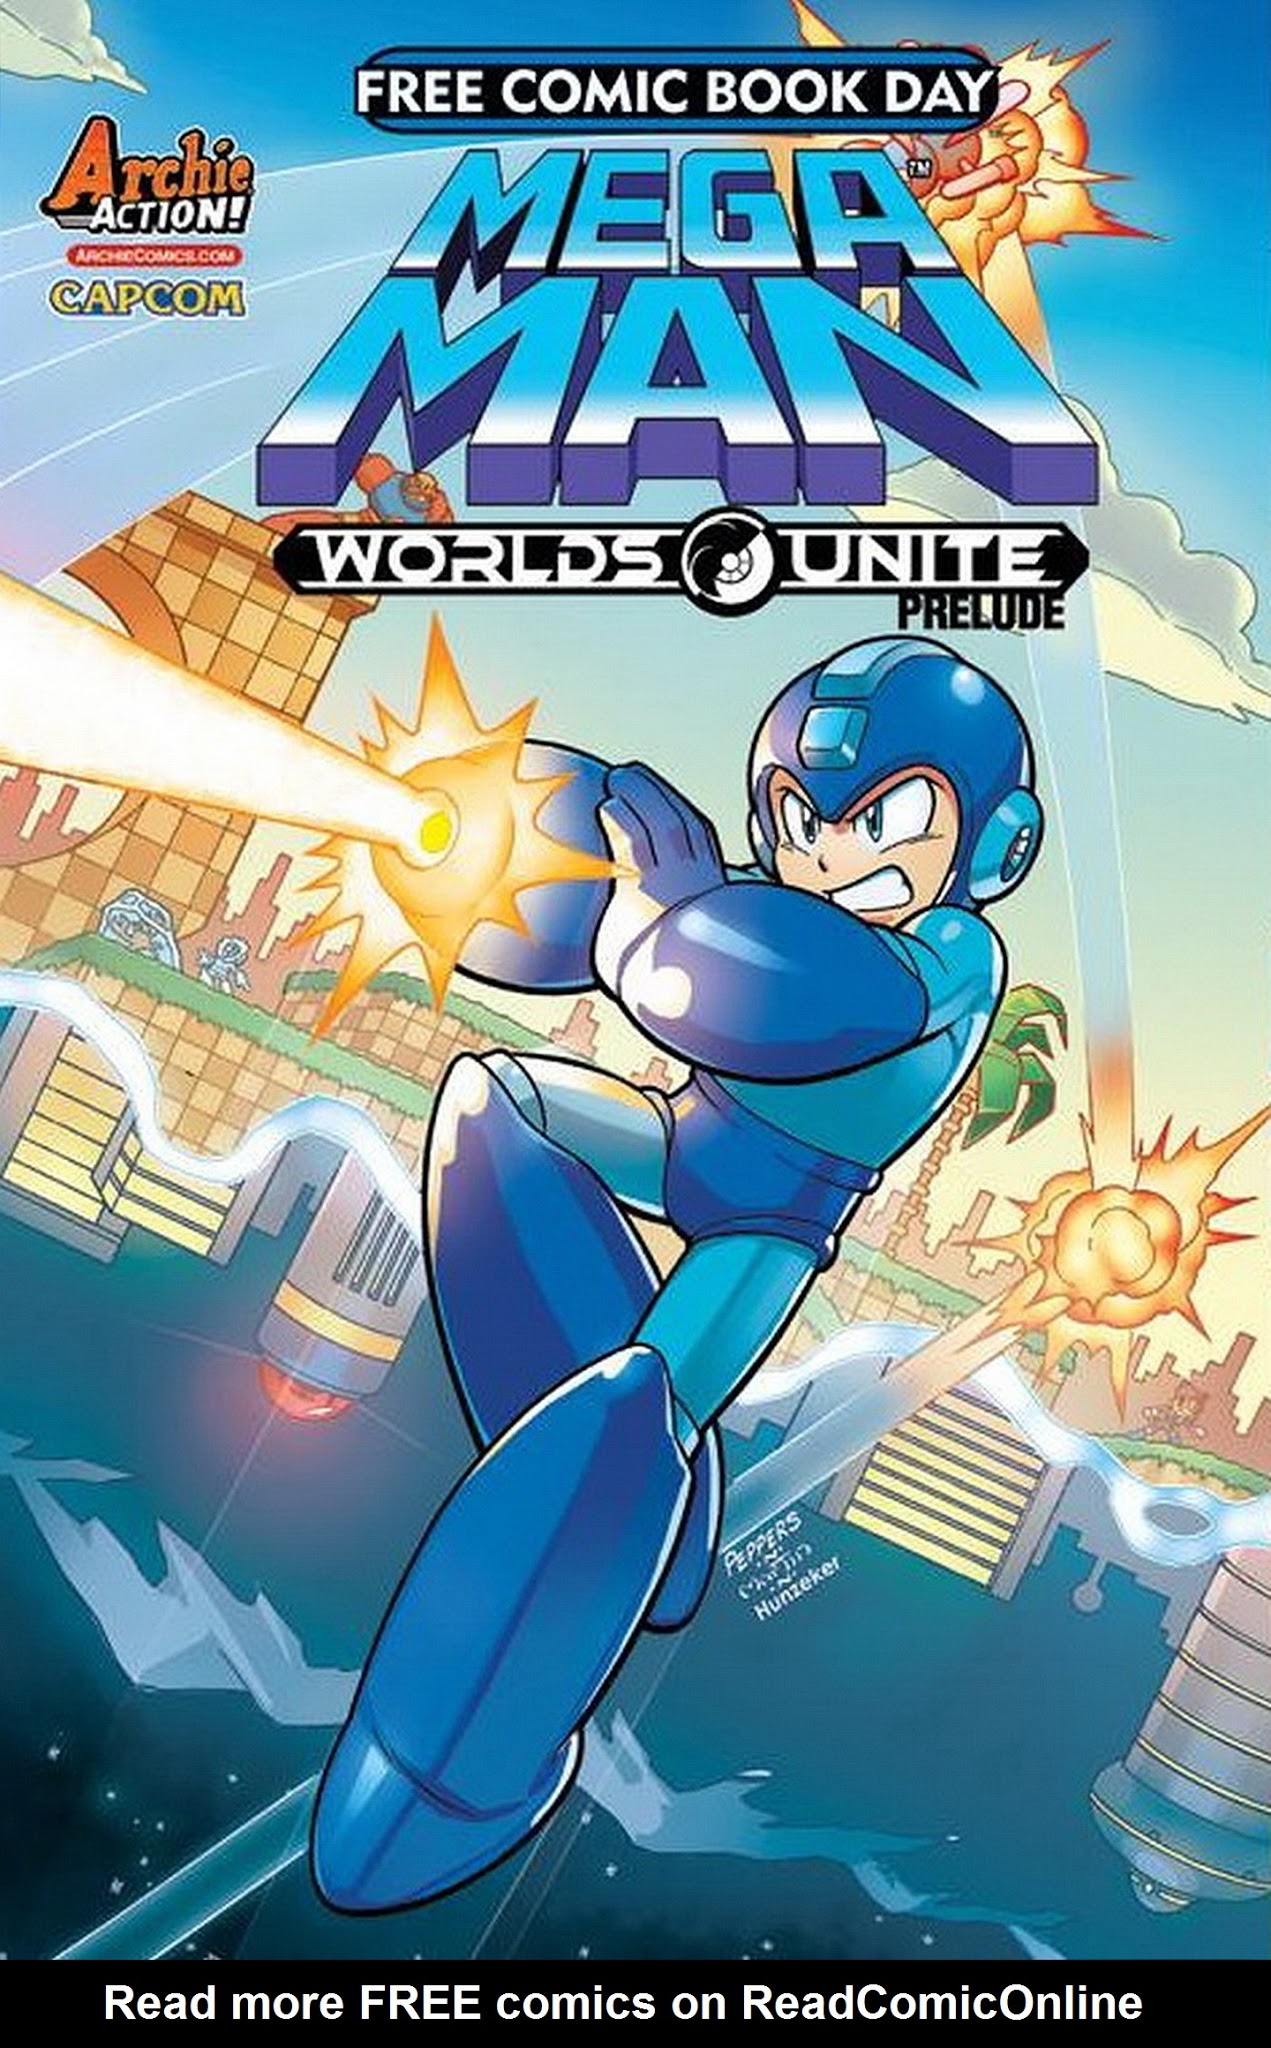 Read online Free Comic Book Day 2015 comic -  Issue # Sonic the Hedgehog - Mega Man Worlds Unite Prelude - 1